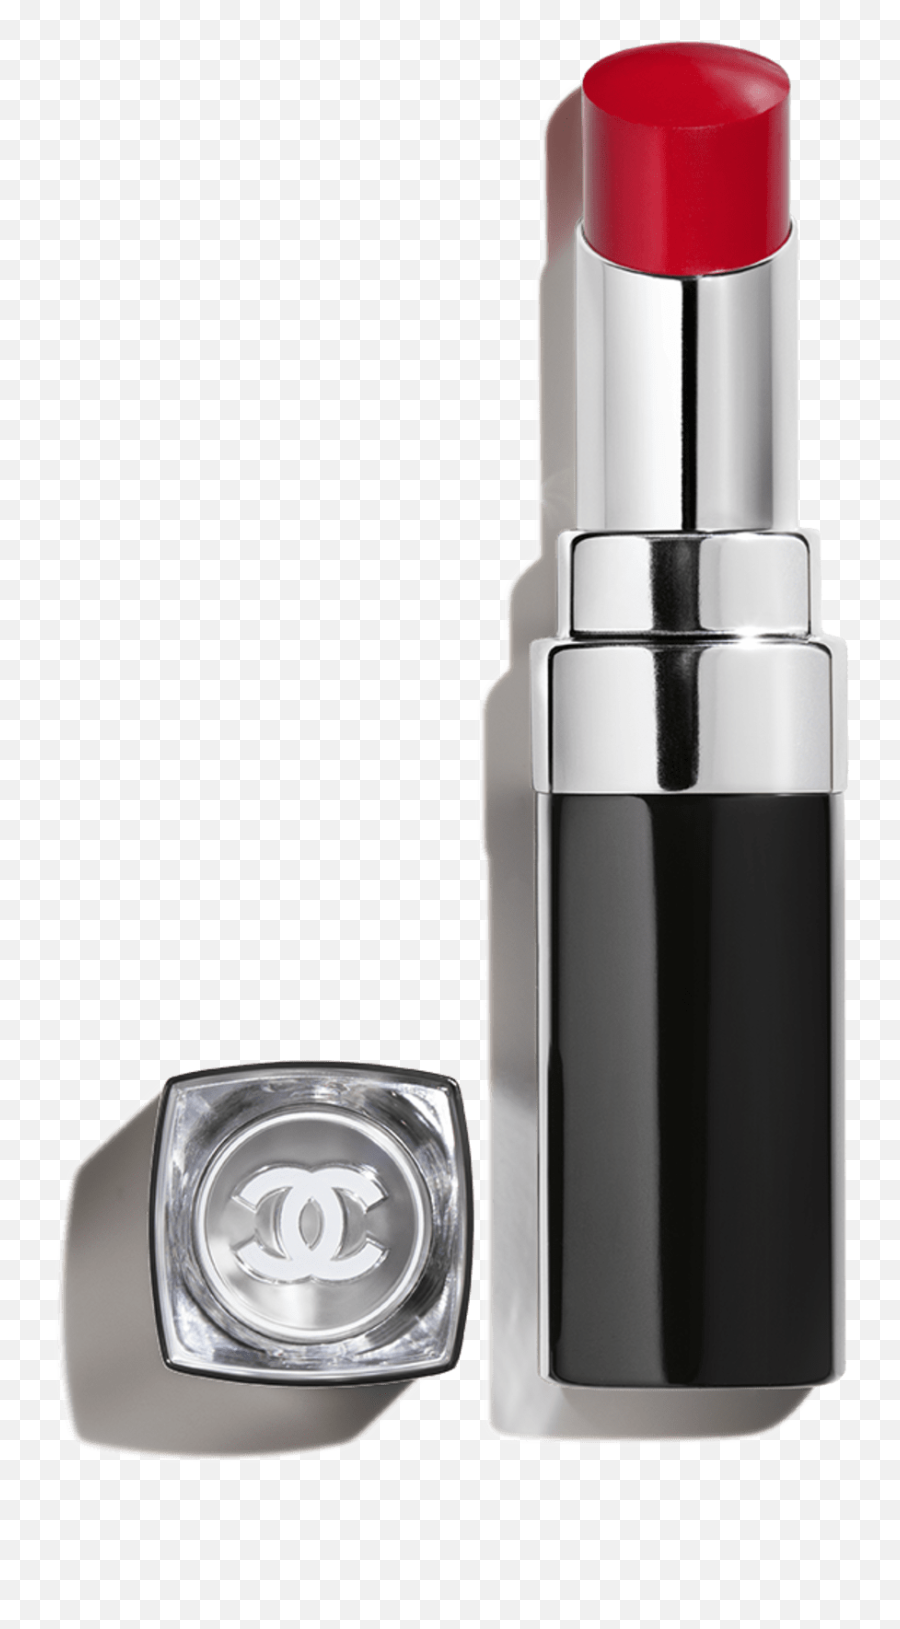 New Rouge Coco Bloom - Lipstick Chanel Chanel Coco Bloom 120 Png,Hourglass Icon Lipstick Review